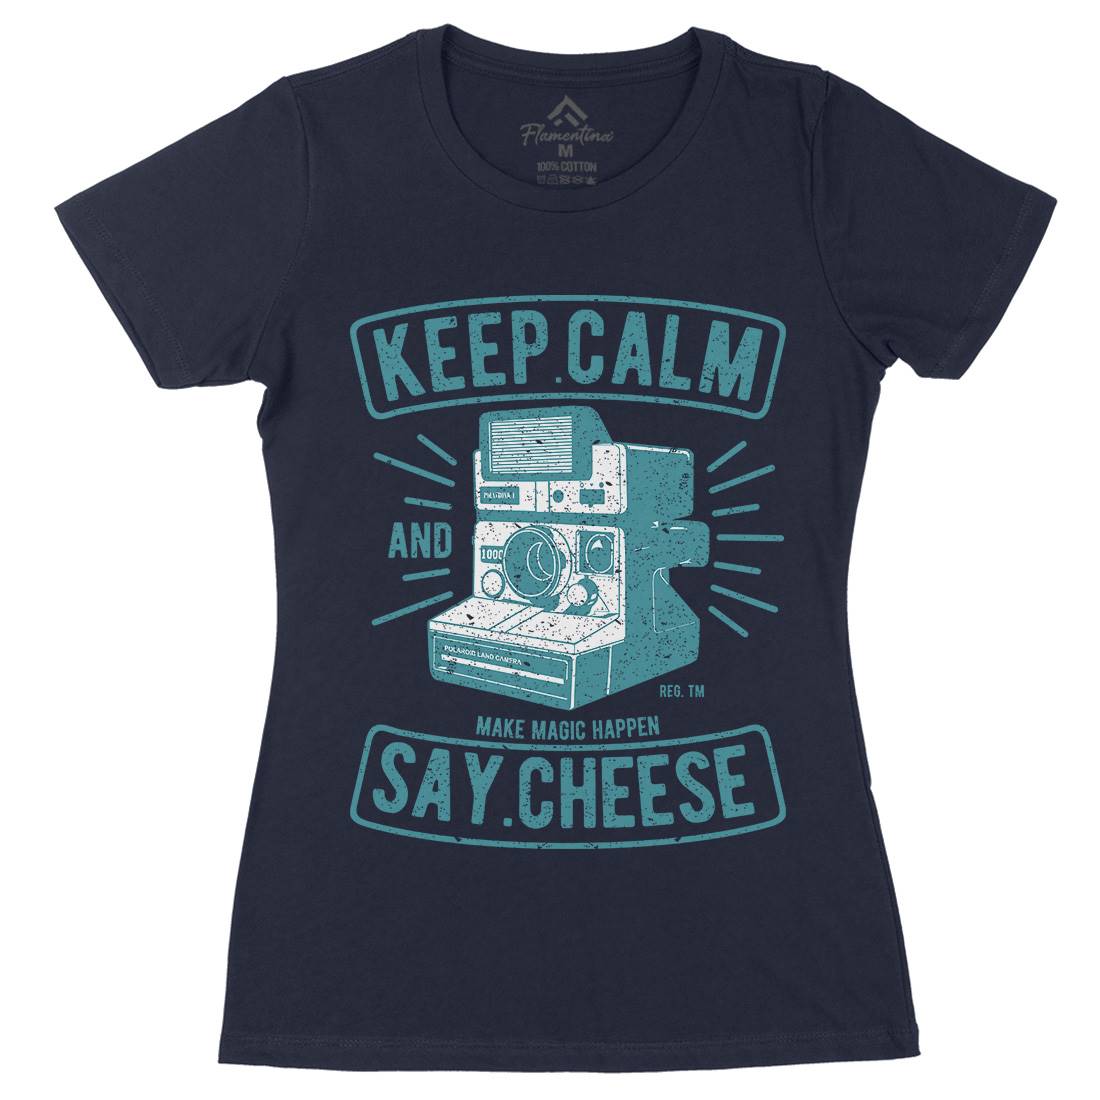 Keep Calm And Say Cheese Womens Organic Crew Neck T-Shirt Media A699